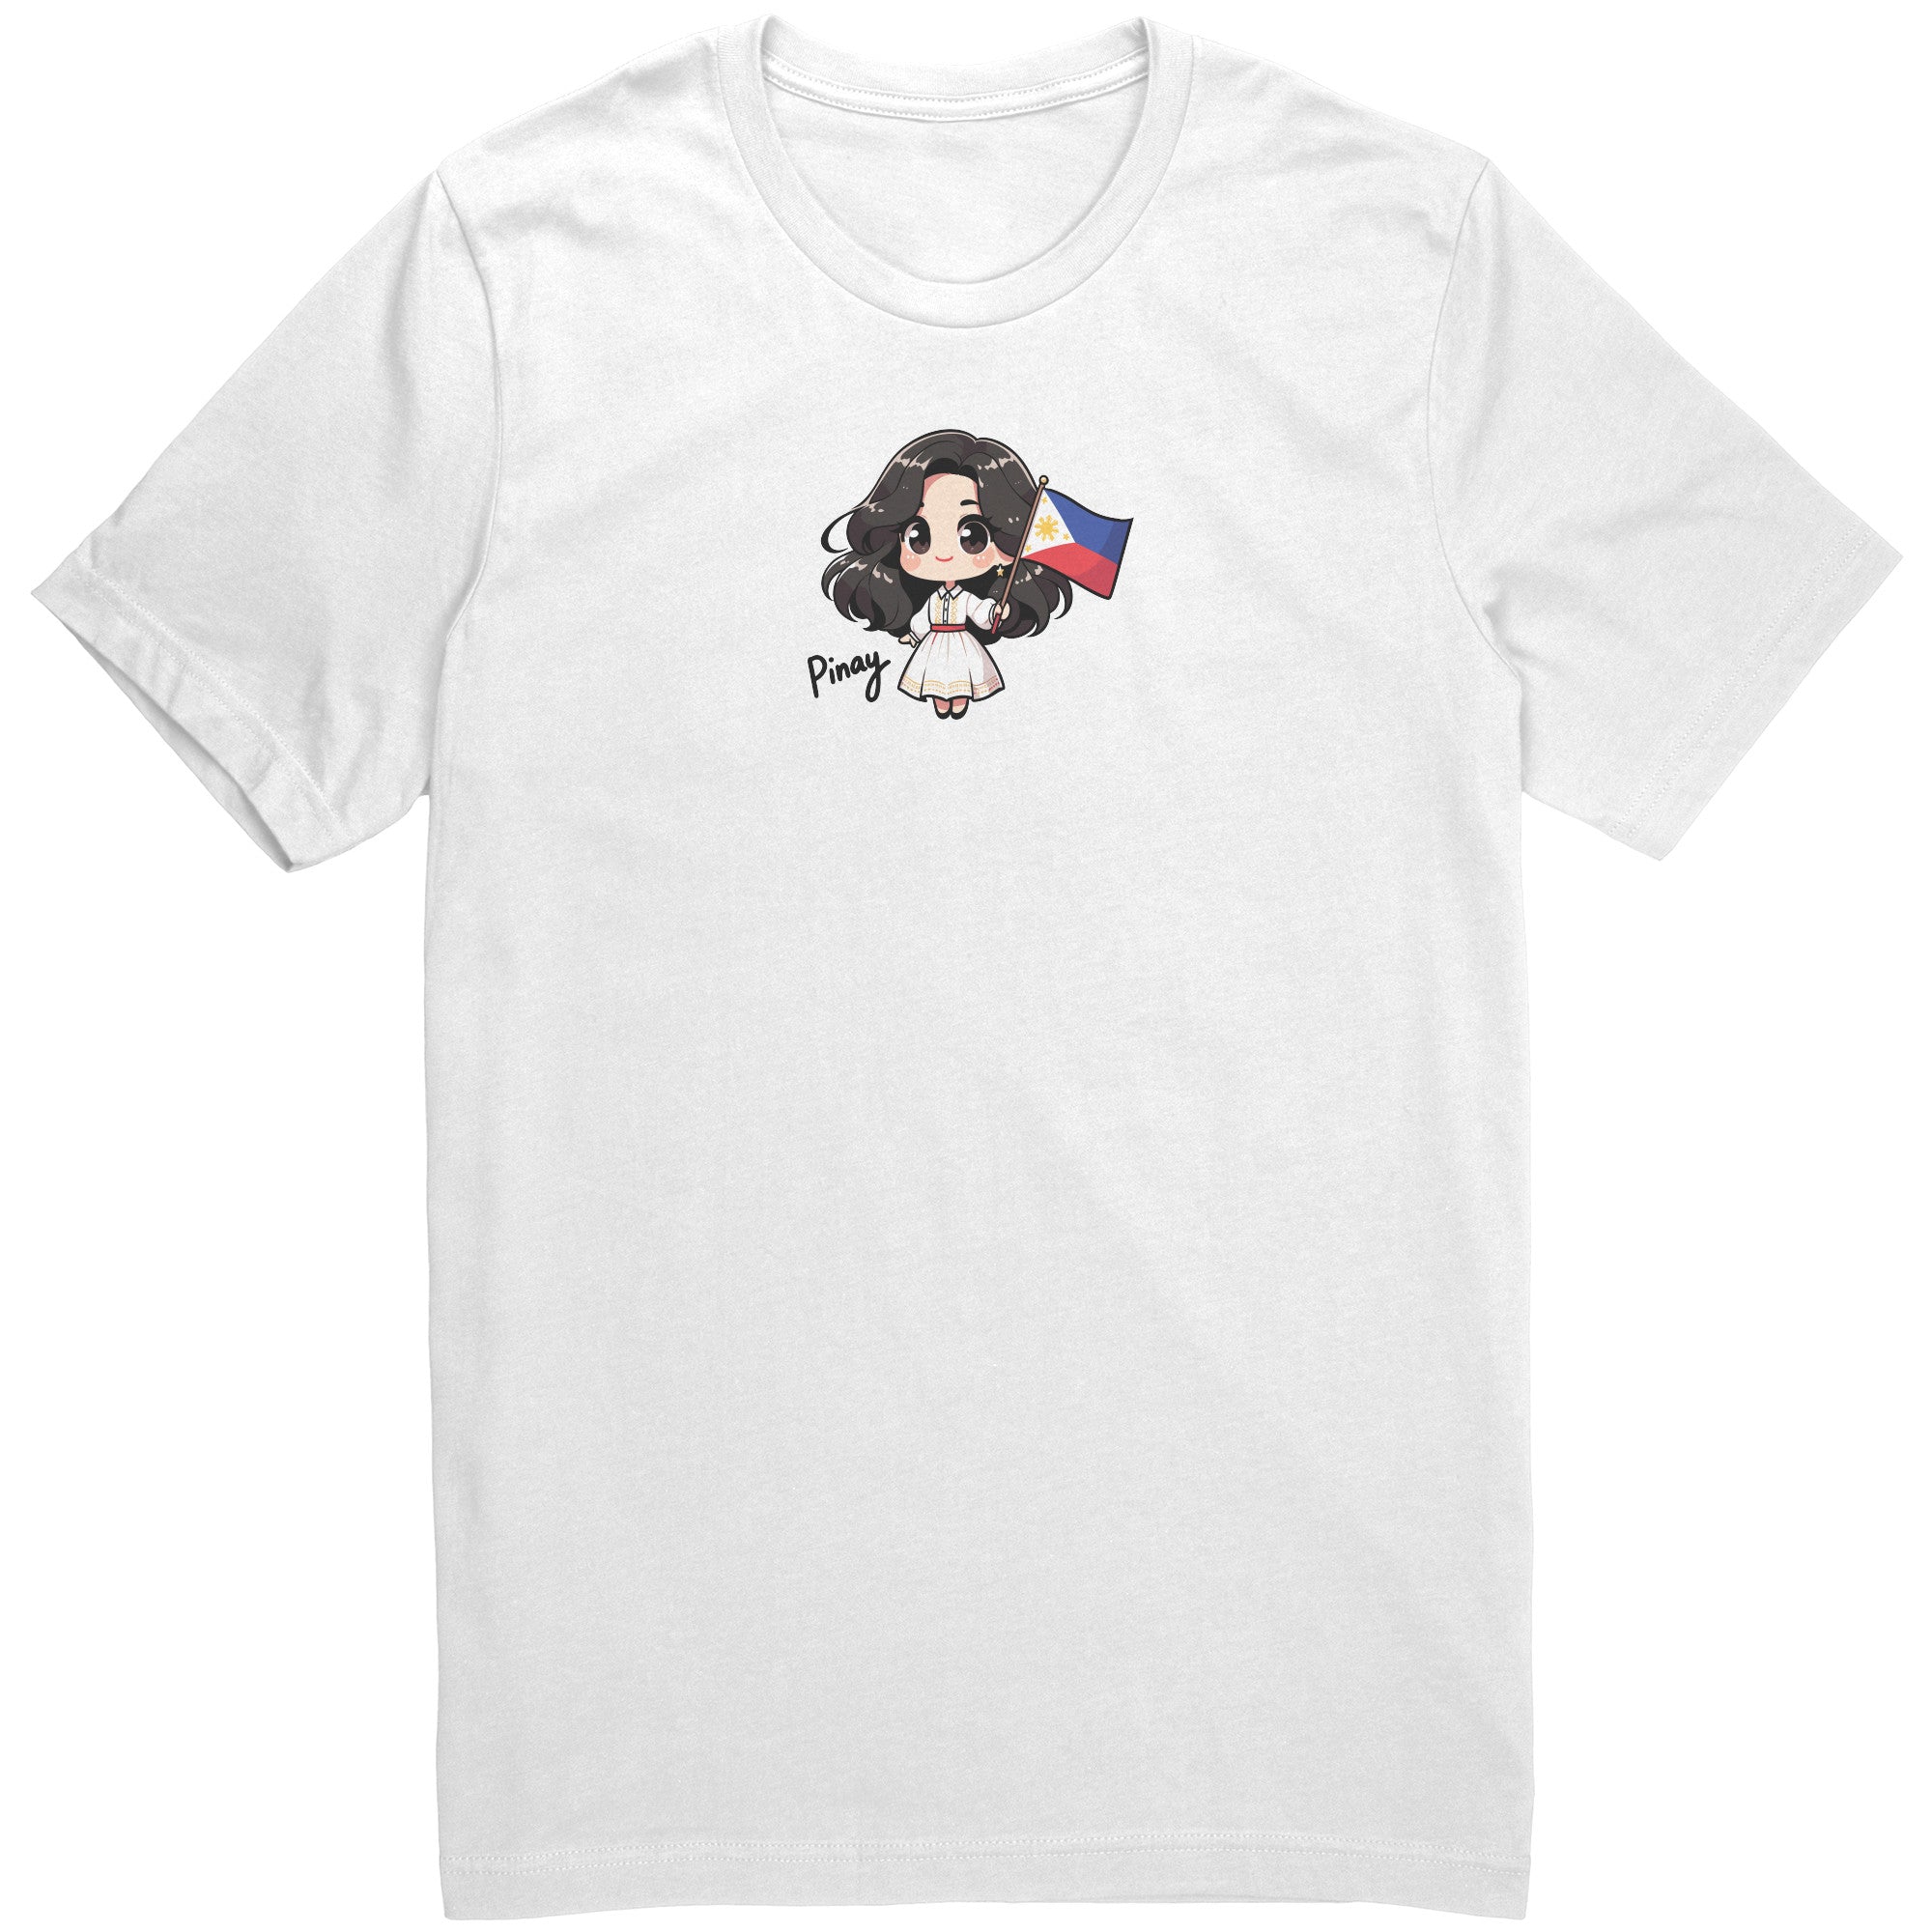 "Cute Cartoon Filipino Pride T-shirt - Vibrant Pinoy Pride Tee - Perfect Gift for Filipinos - Colorful Philippines Heritage Tee" - L